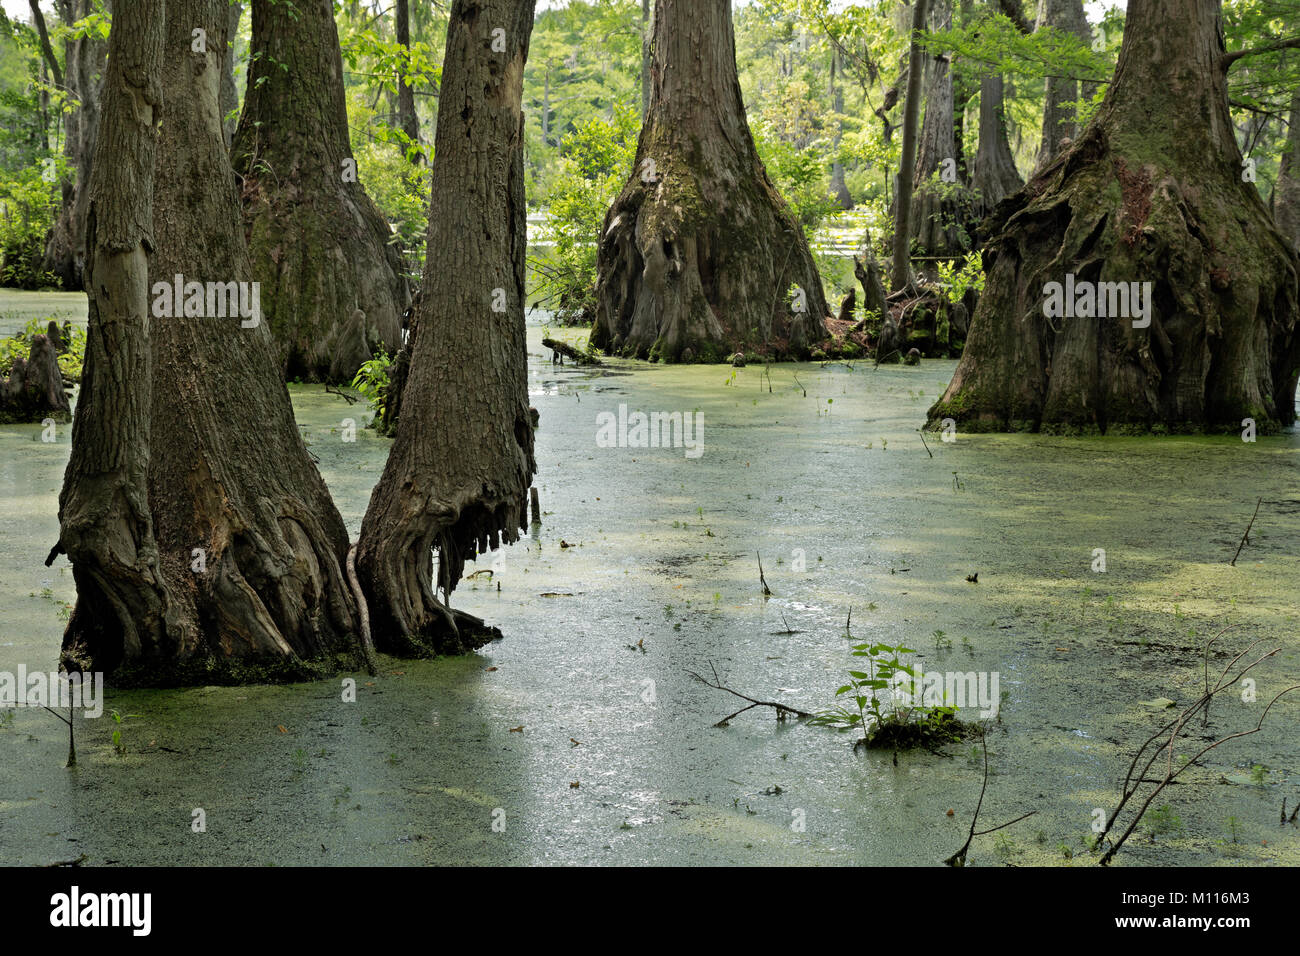 NC01446-00...NORTH CAROLINA - A cypress swamp and planty of duckweed in the still waters of Merchant Millpond in Merchant Millpond State Park. Stock Photo